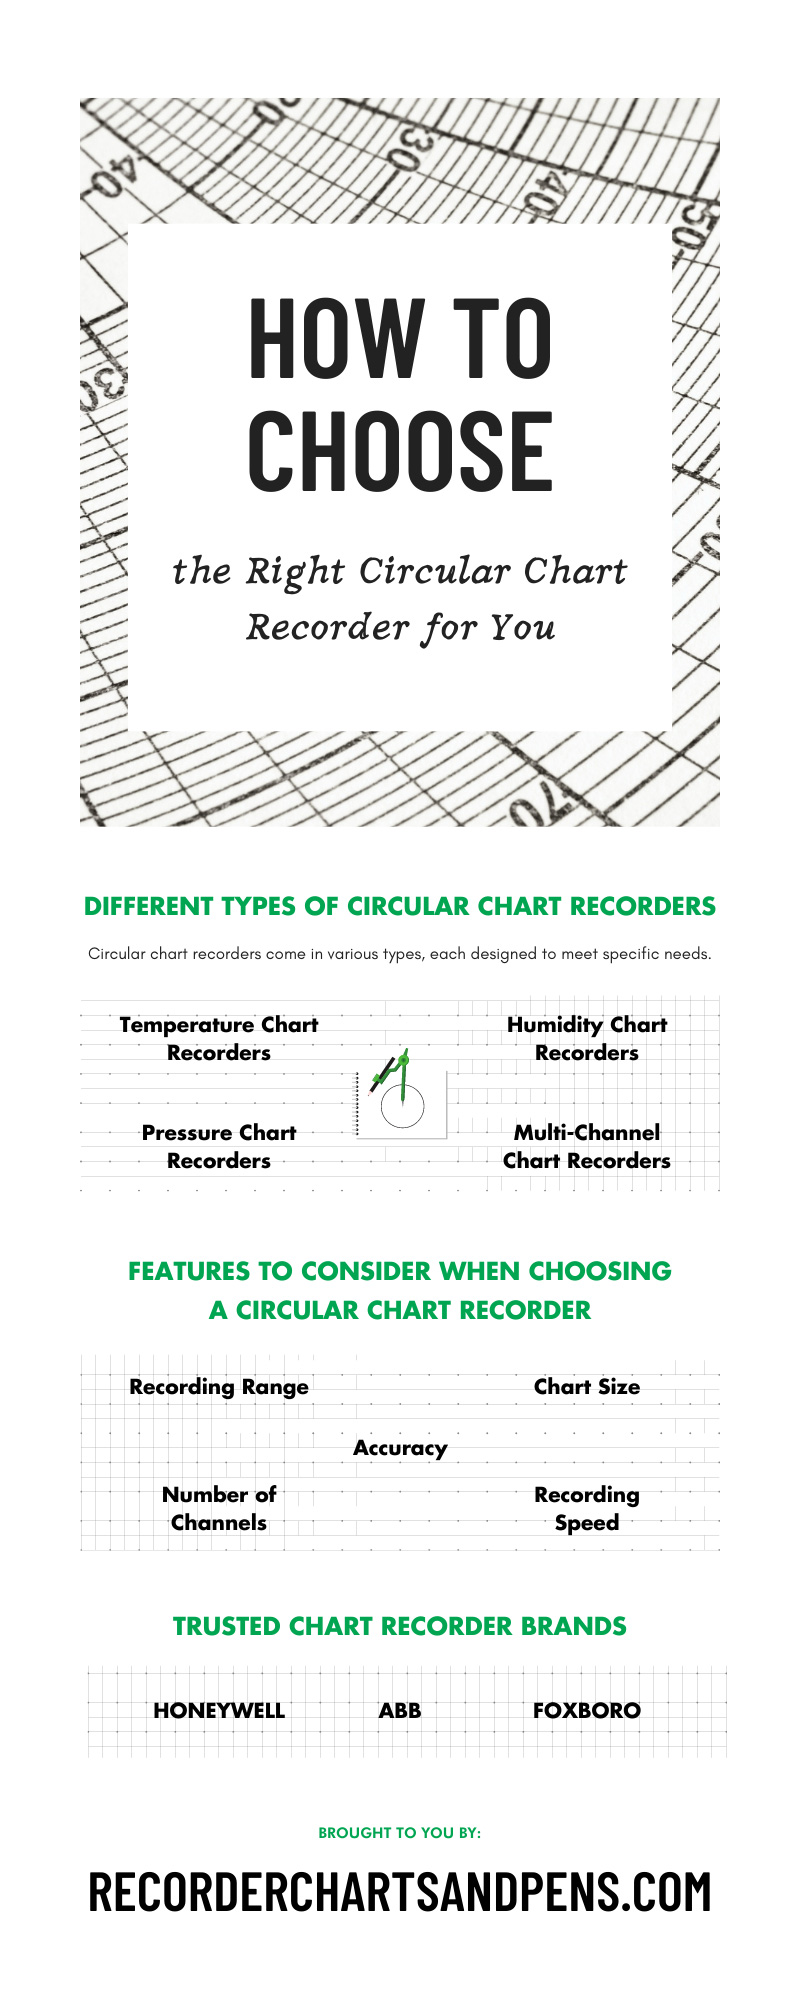 How To Choose the Right Circular Chart Recorder for You